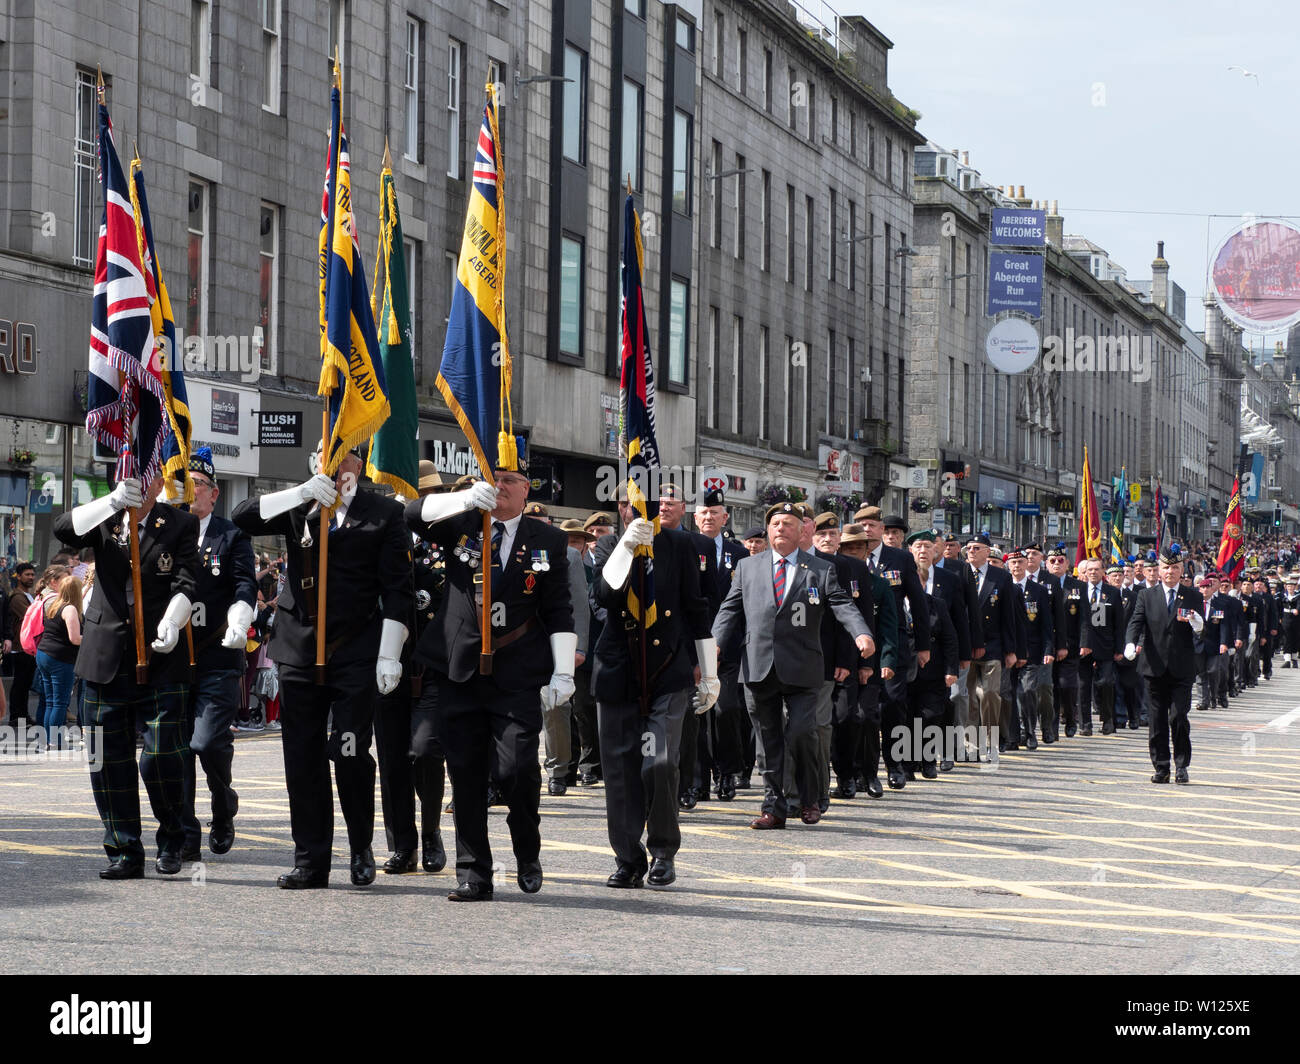 Aberdeen, Scotland - June 29th, 2019: Military personnel, veterans and cadets parading on Union Street, Aberdeen, to mark Armed Forces Day in the UK. Stock Photo